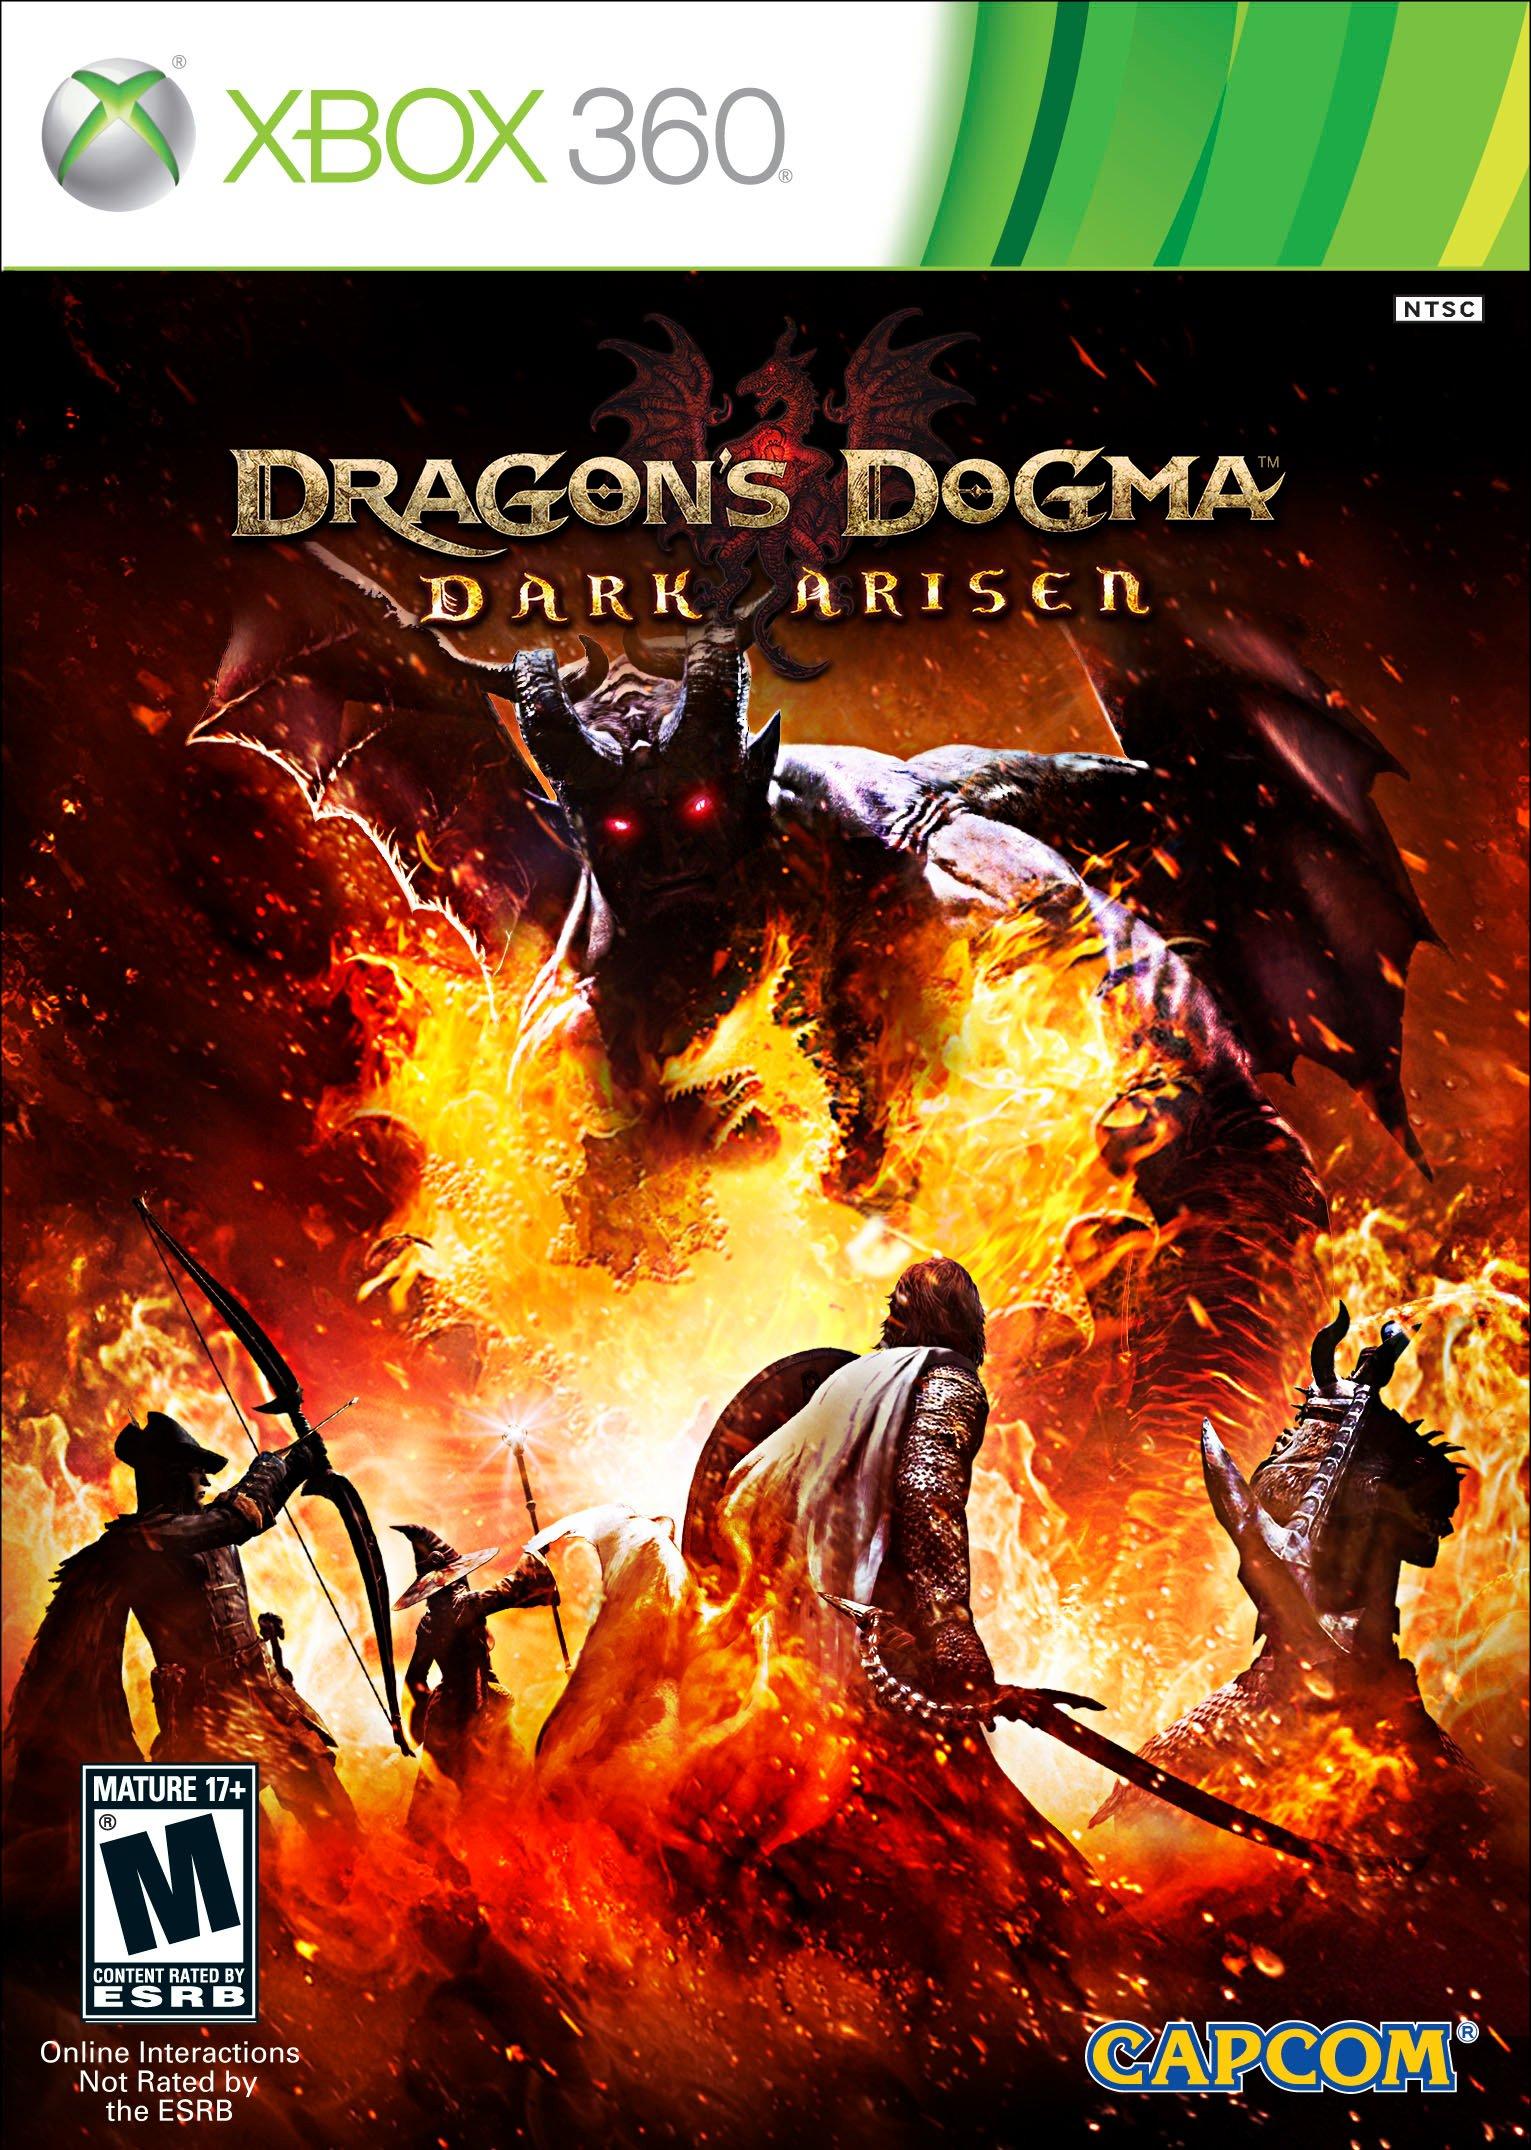 Dragons Dogma Online - All vocations/Classes in action 